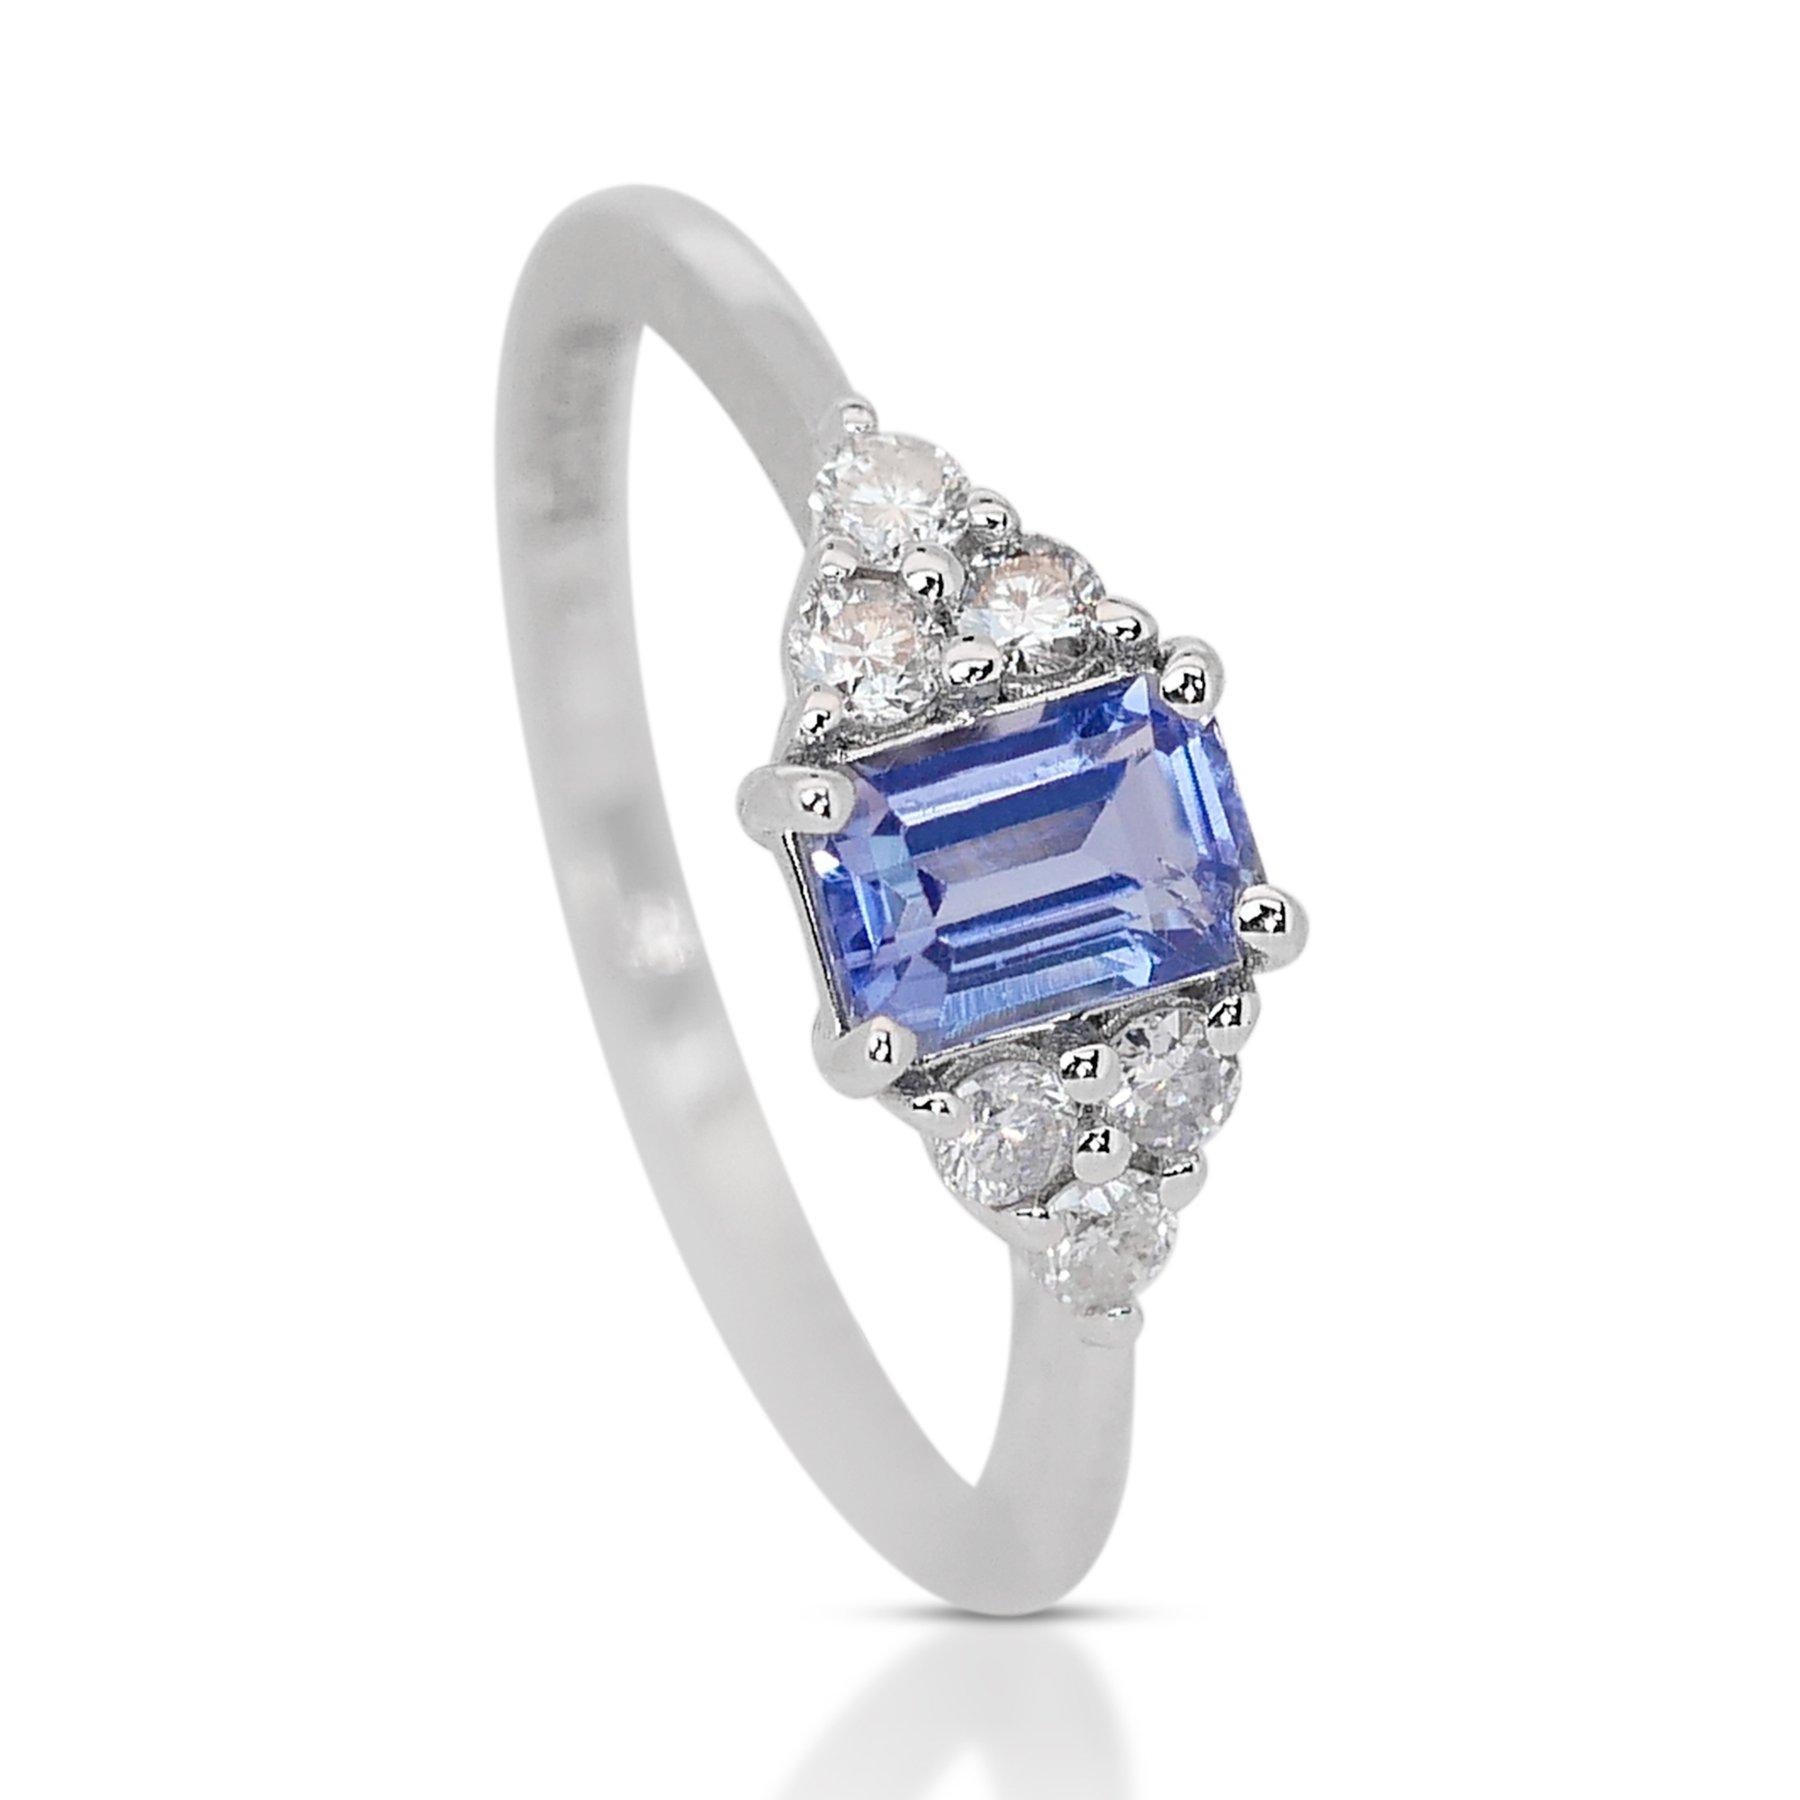 Mesmerizing 18k White Gold Tanzanite and Diamond Pave Ring w/1.06 ct - IGI Certified

Discover the enchanting beauty of this 18k White Gold Pave Ring. At the heart of this exquisite piece is a 0.81 ct Emerald-cut Tanzanite with a deep violetish-blue